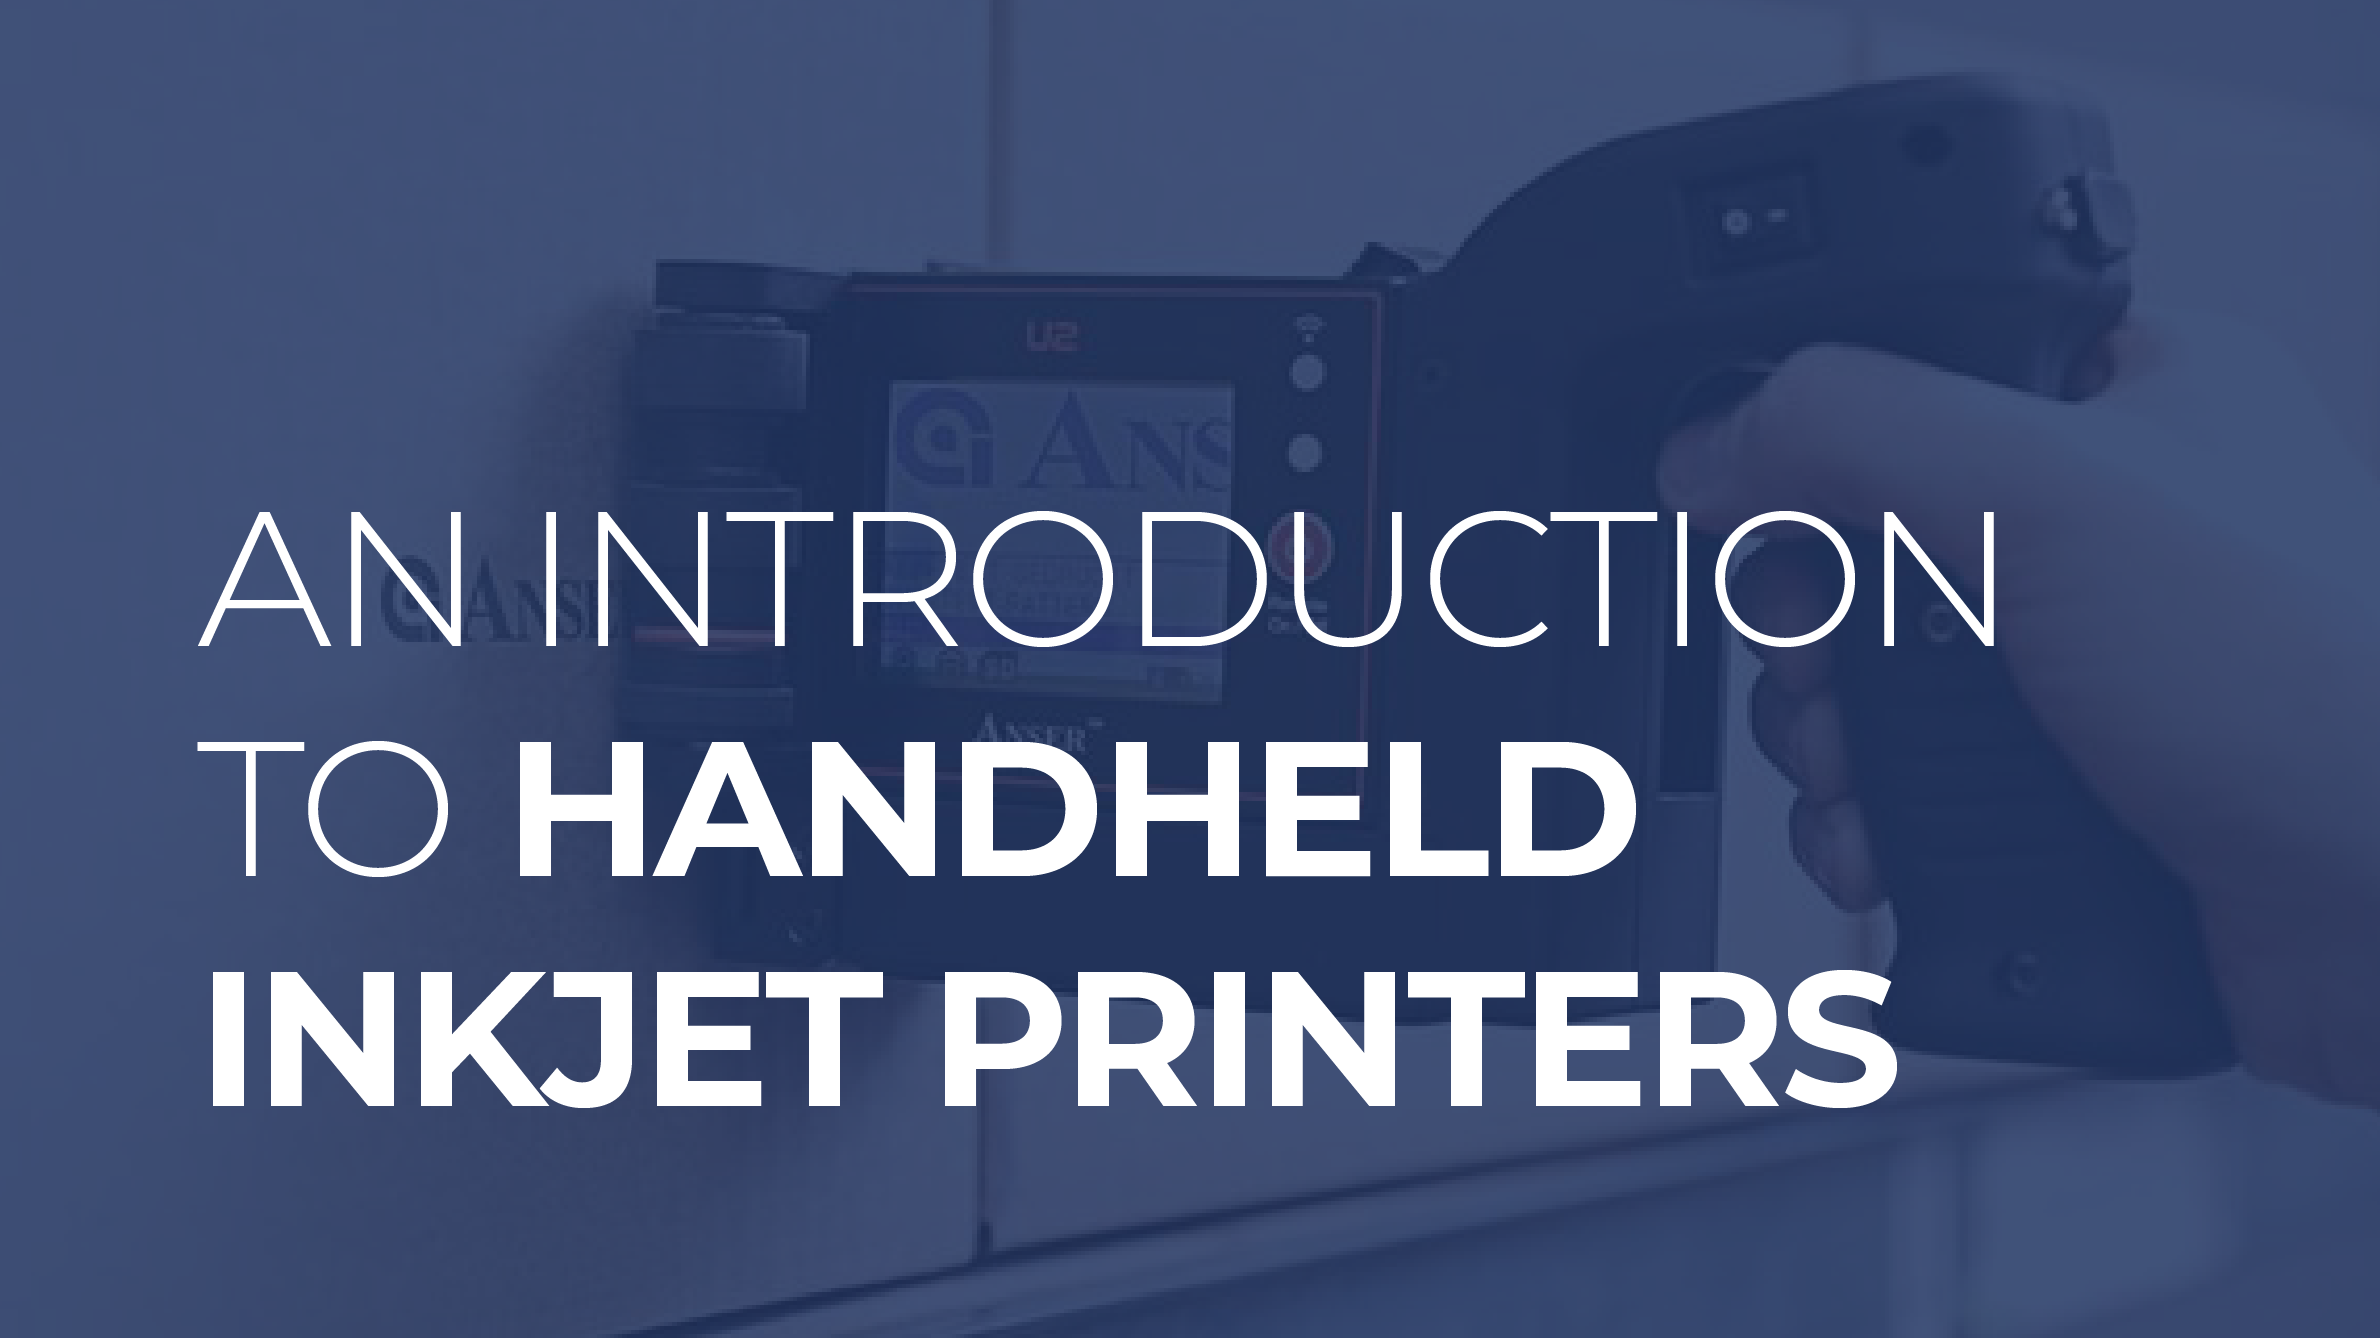 An Introduction to Handheld Inkjet Printers